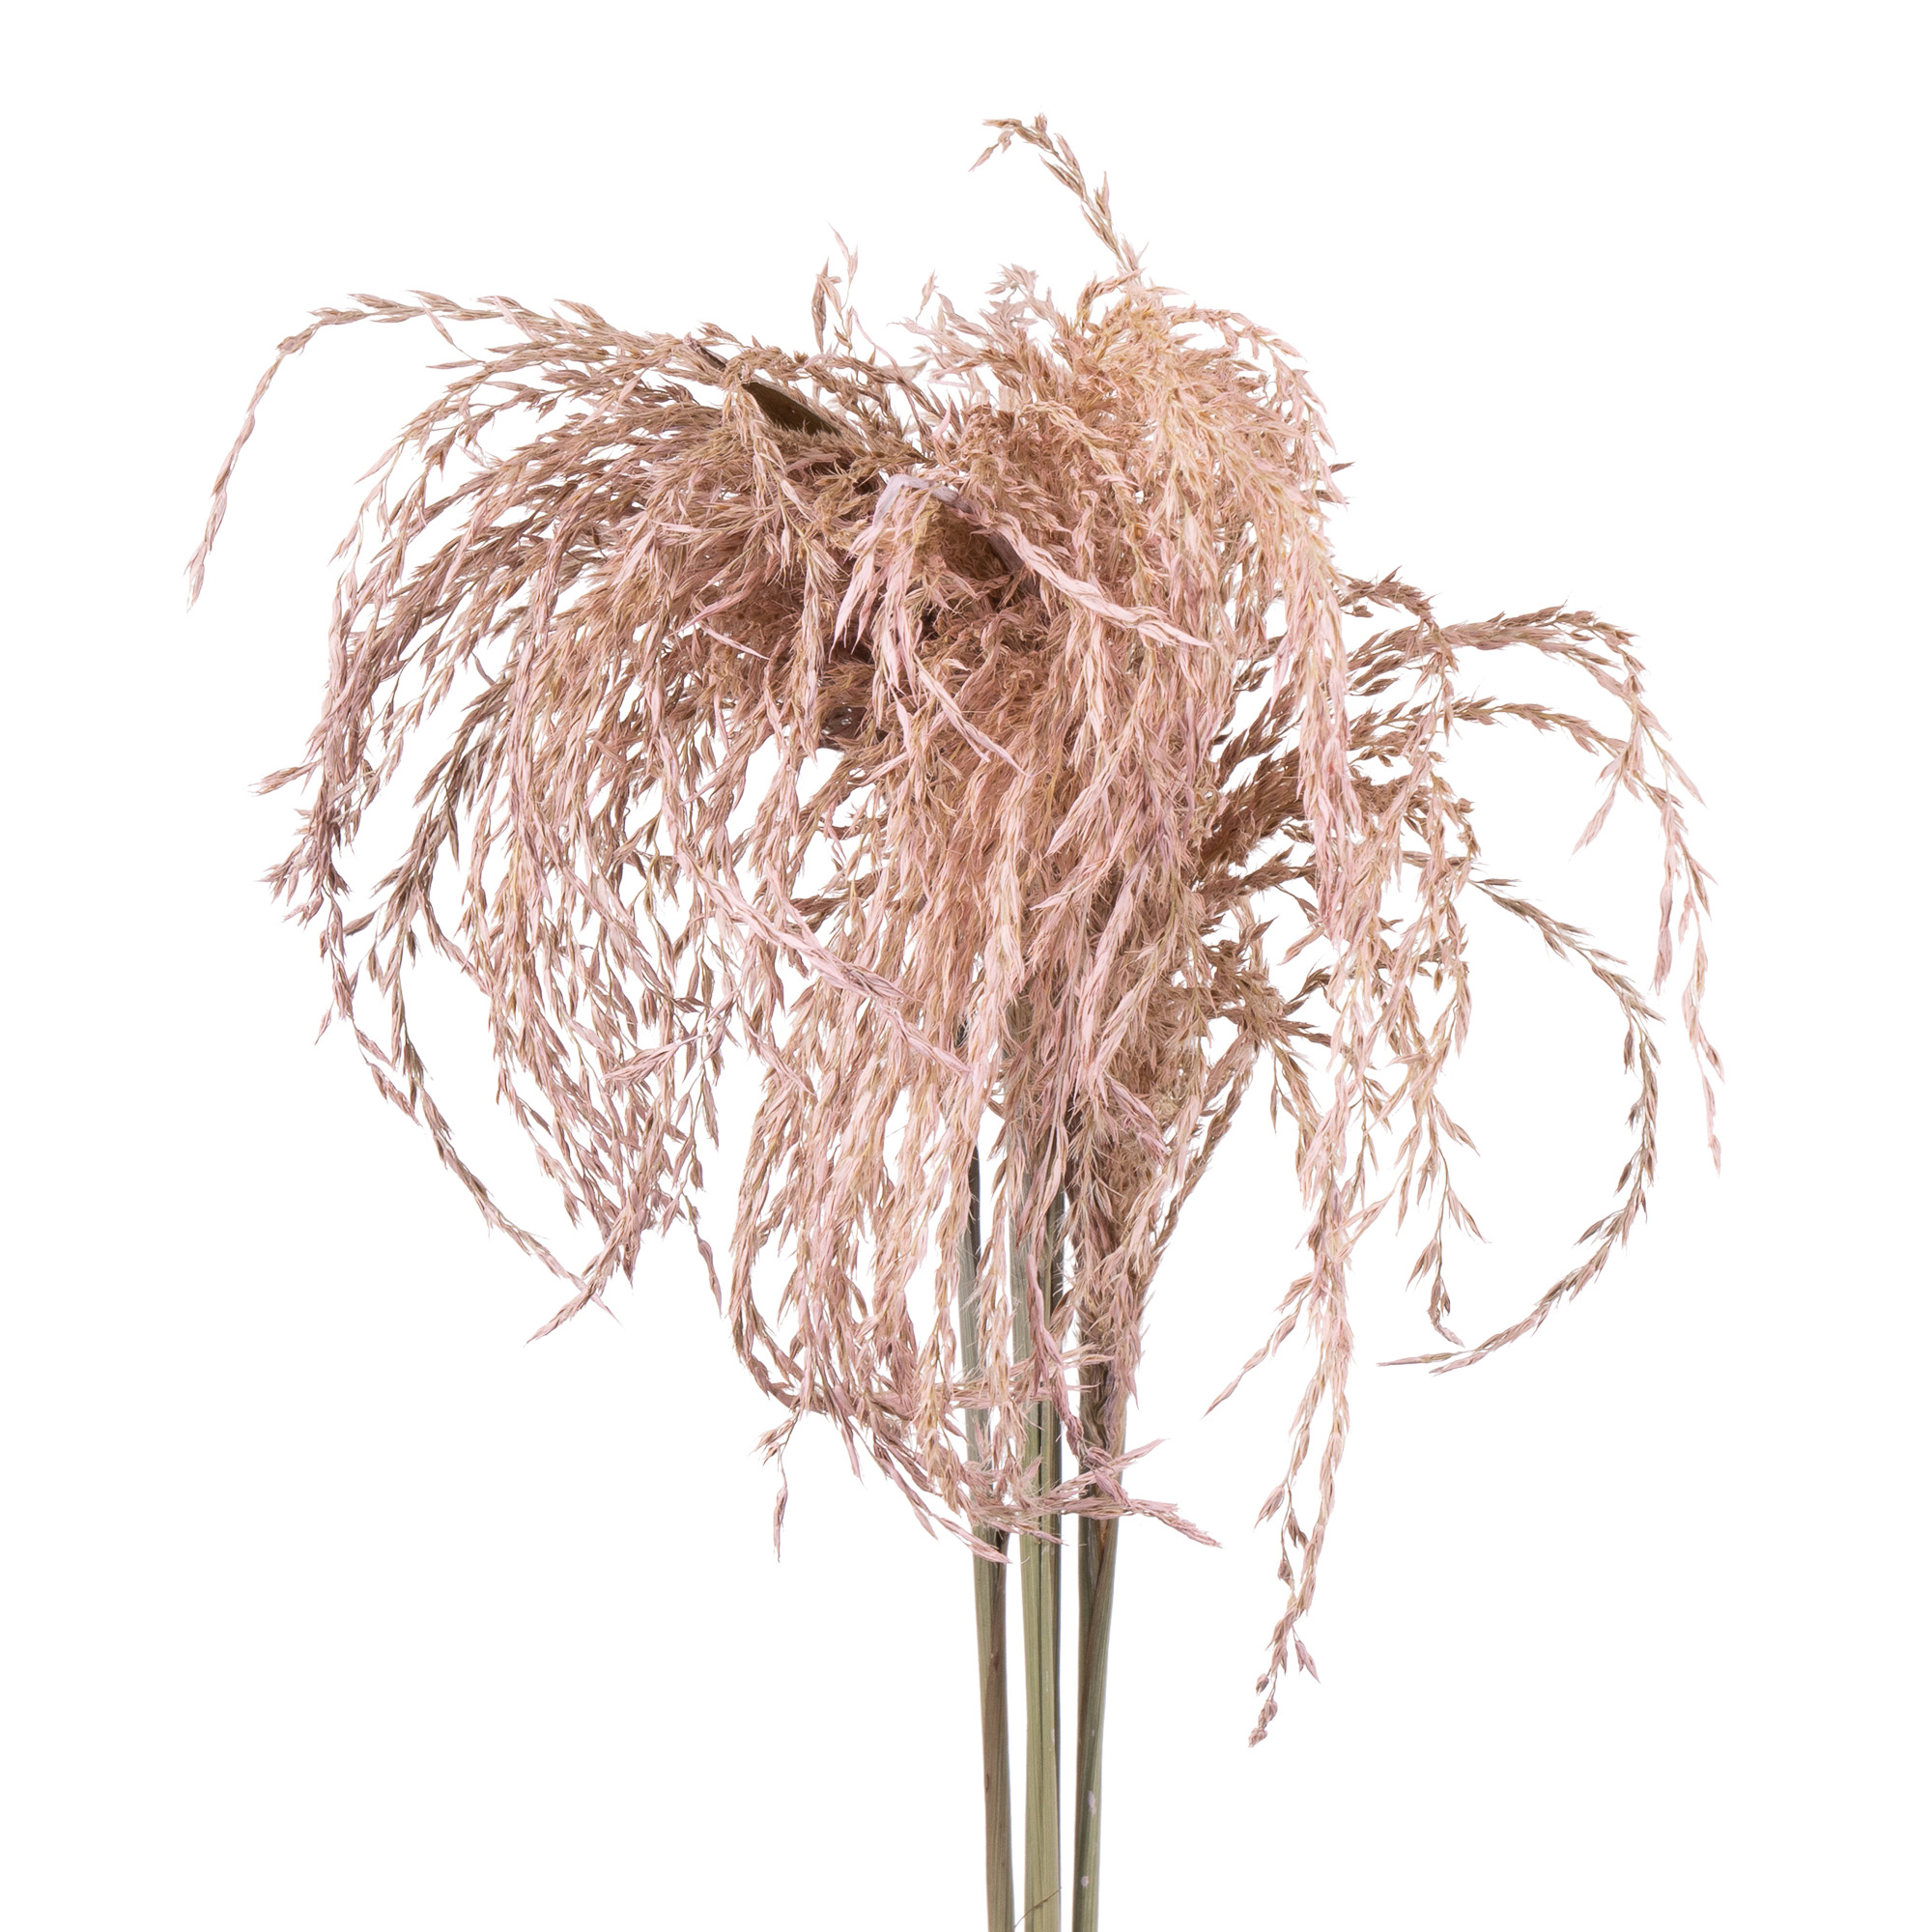 Miscanthus dry dyed light pink